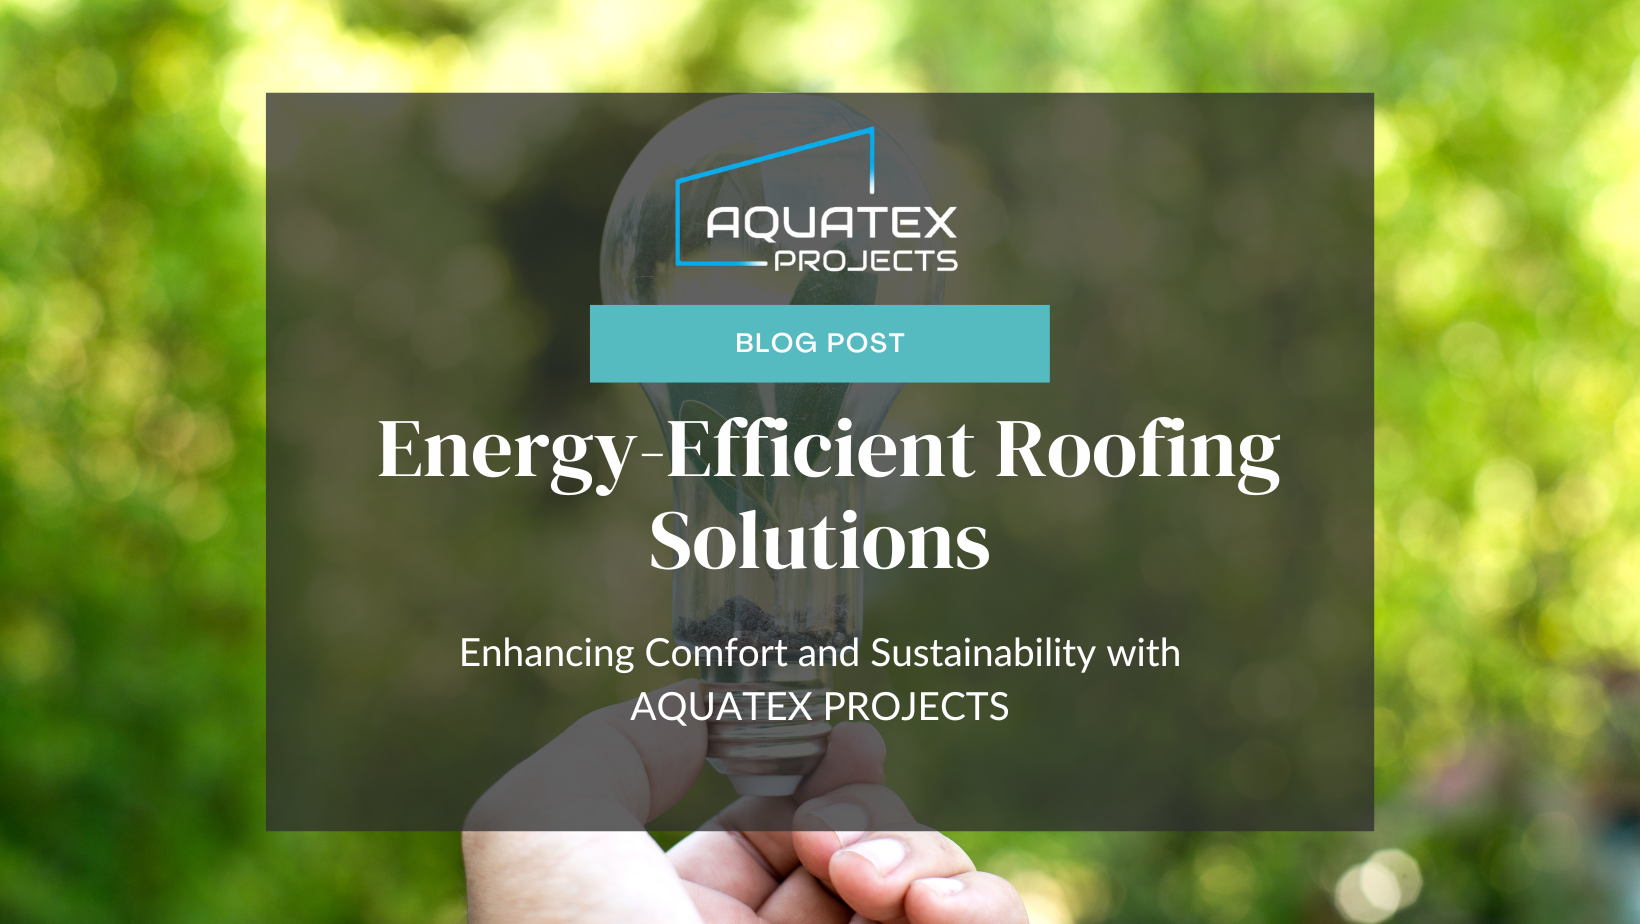 Energy-Efficient Roofing Solutions: Enhancing Comfort and Sustainability with AQUATEX PROJECTS